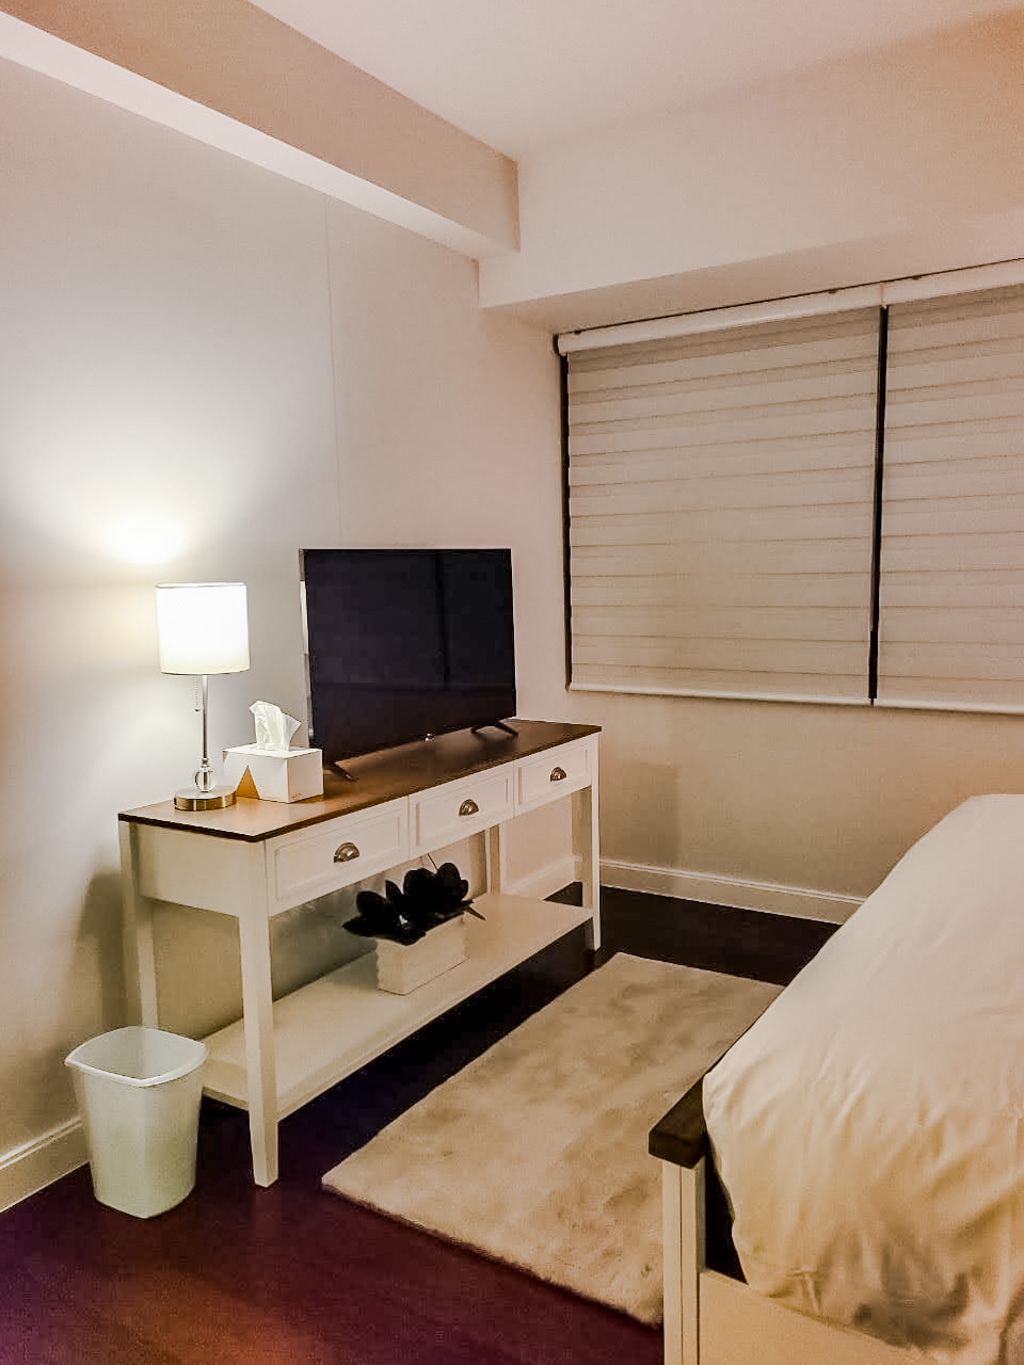 RCALC14 Furnished 1 Bedroom Condo for Rent in Cebu Business Park - 8